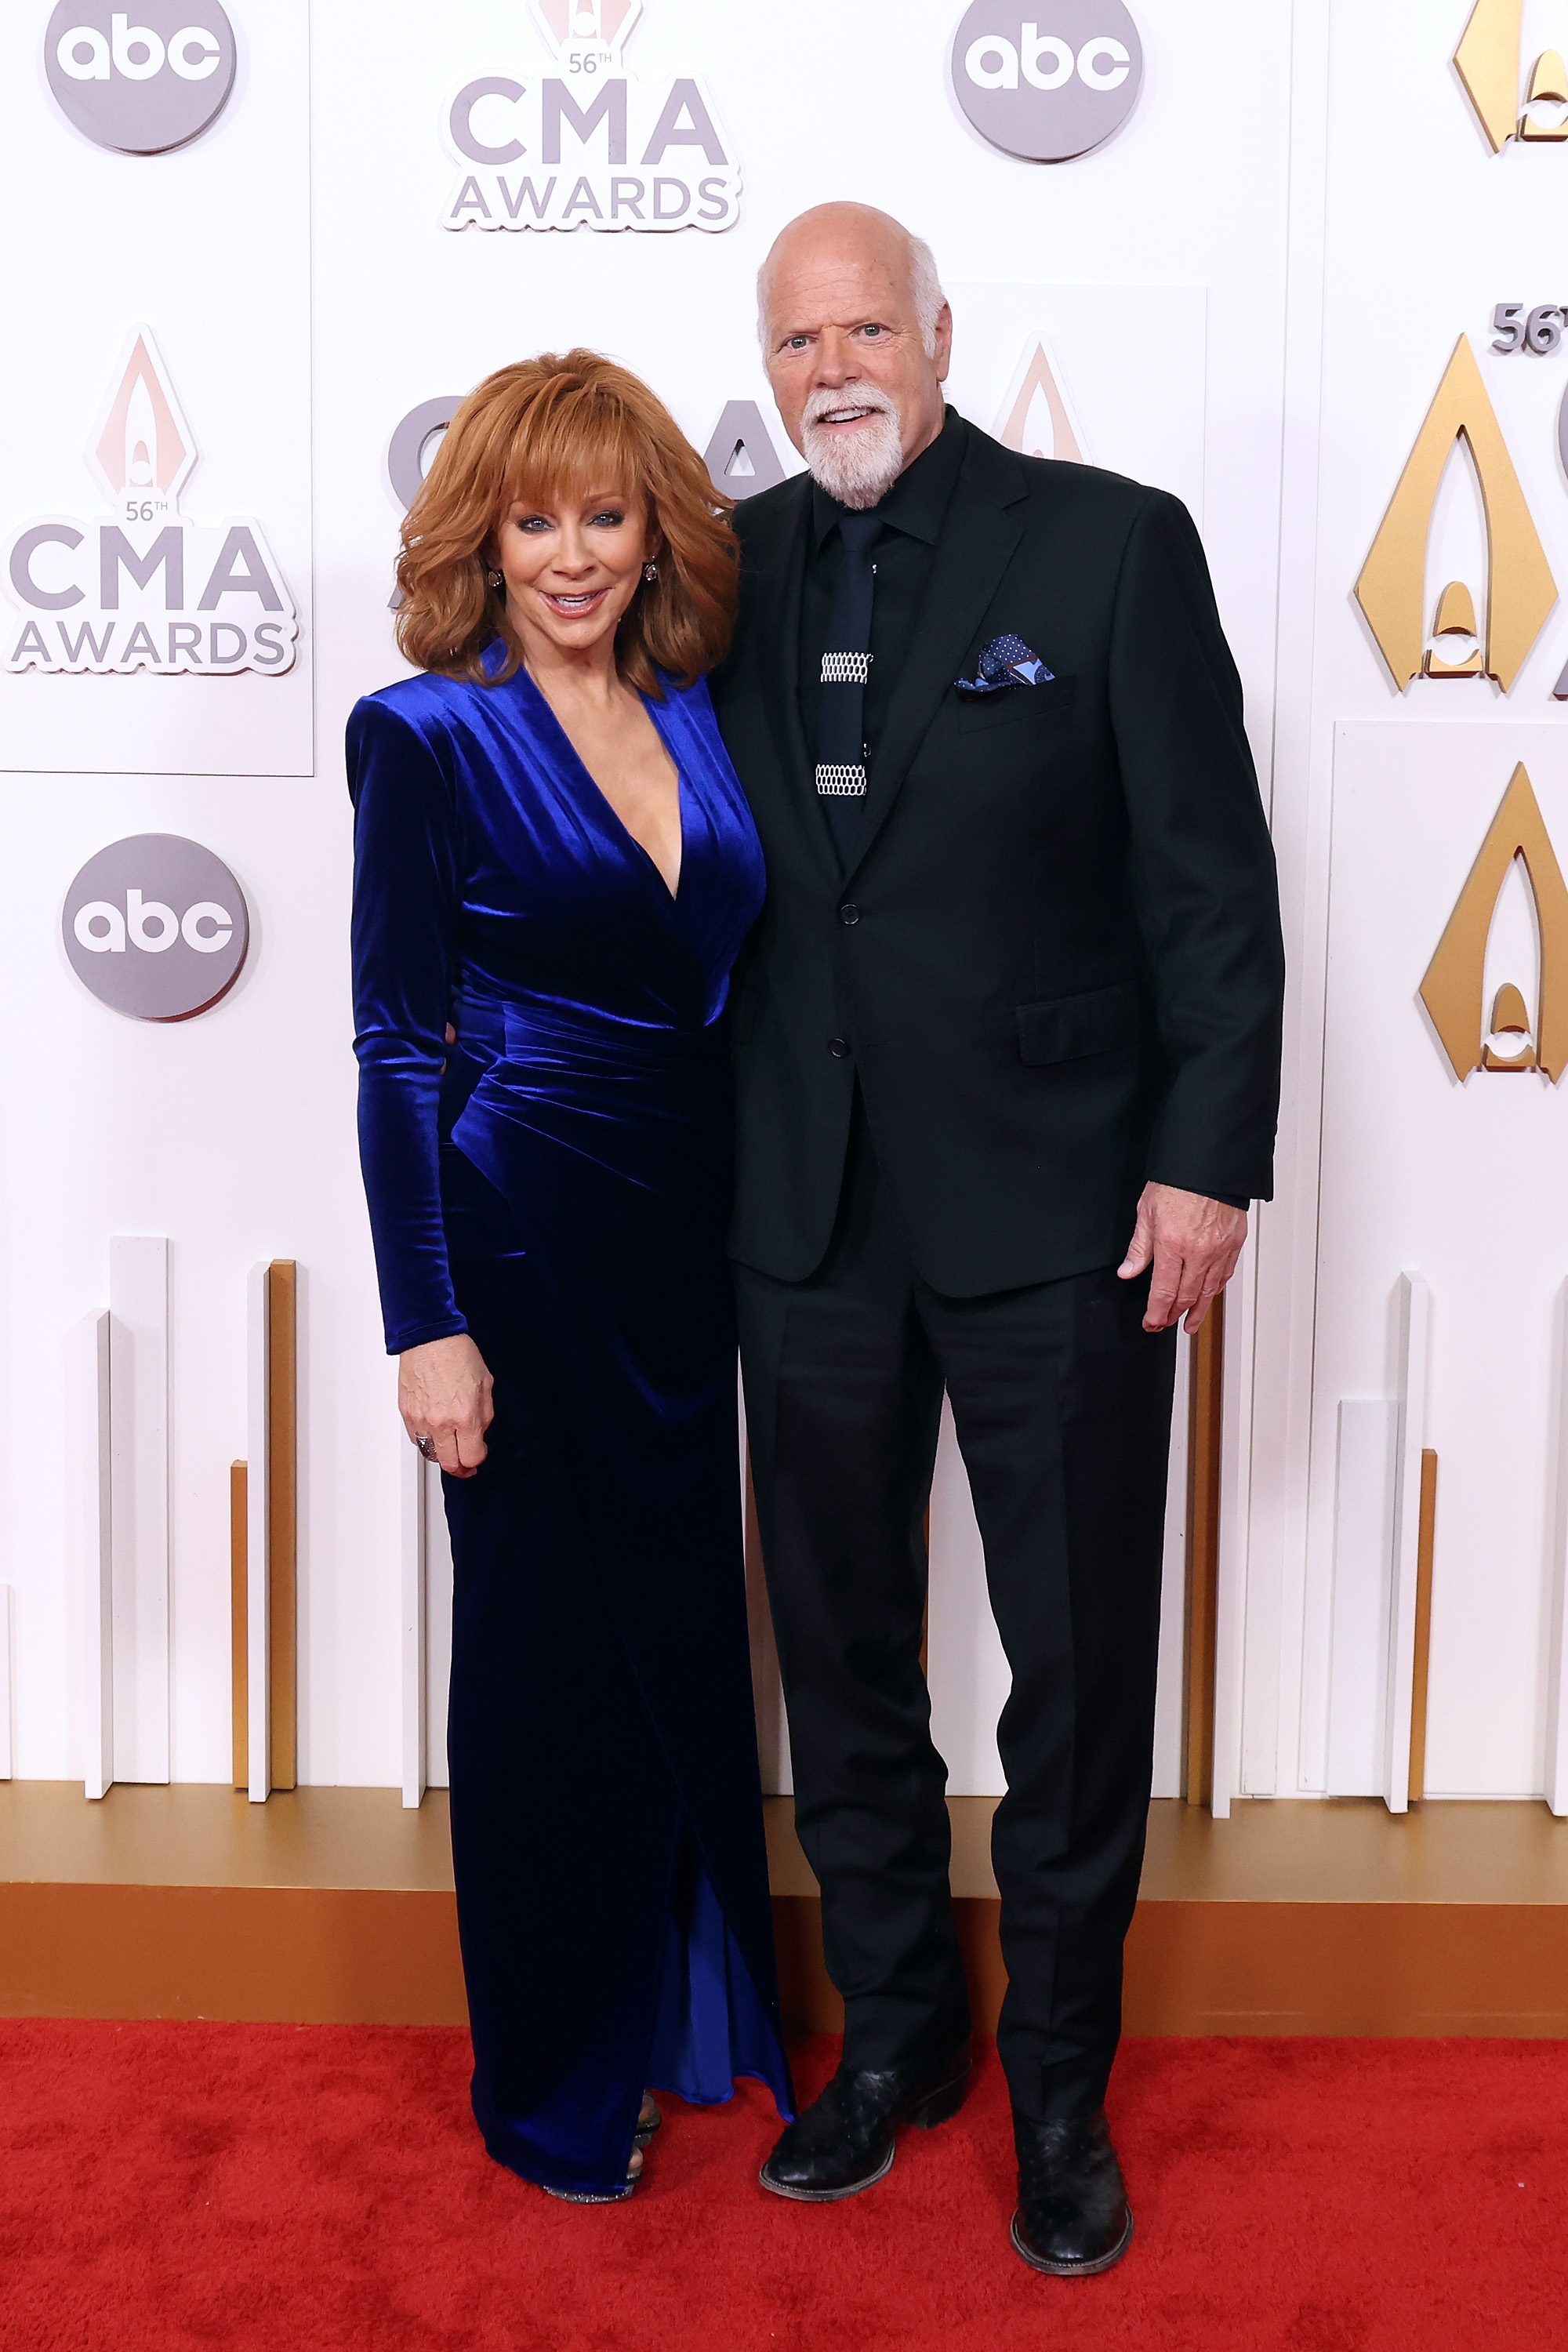 Reba McEntire and Rex Linn at the 56th Annual CMA Awards in Nashville, 2022 | Source: Getty Images